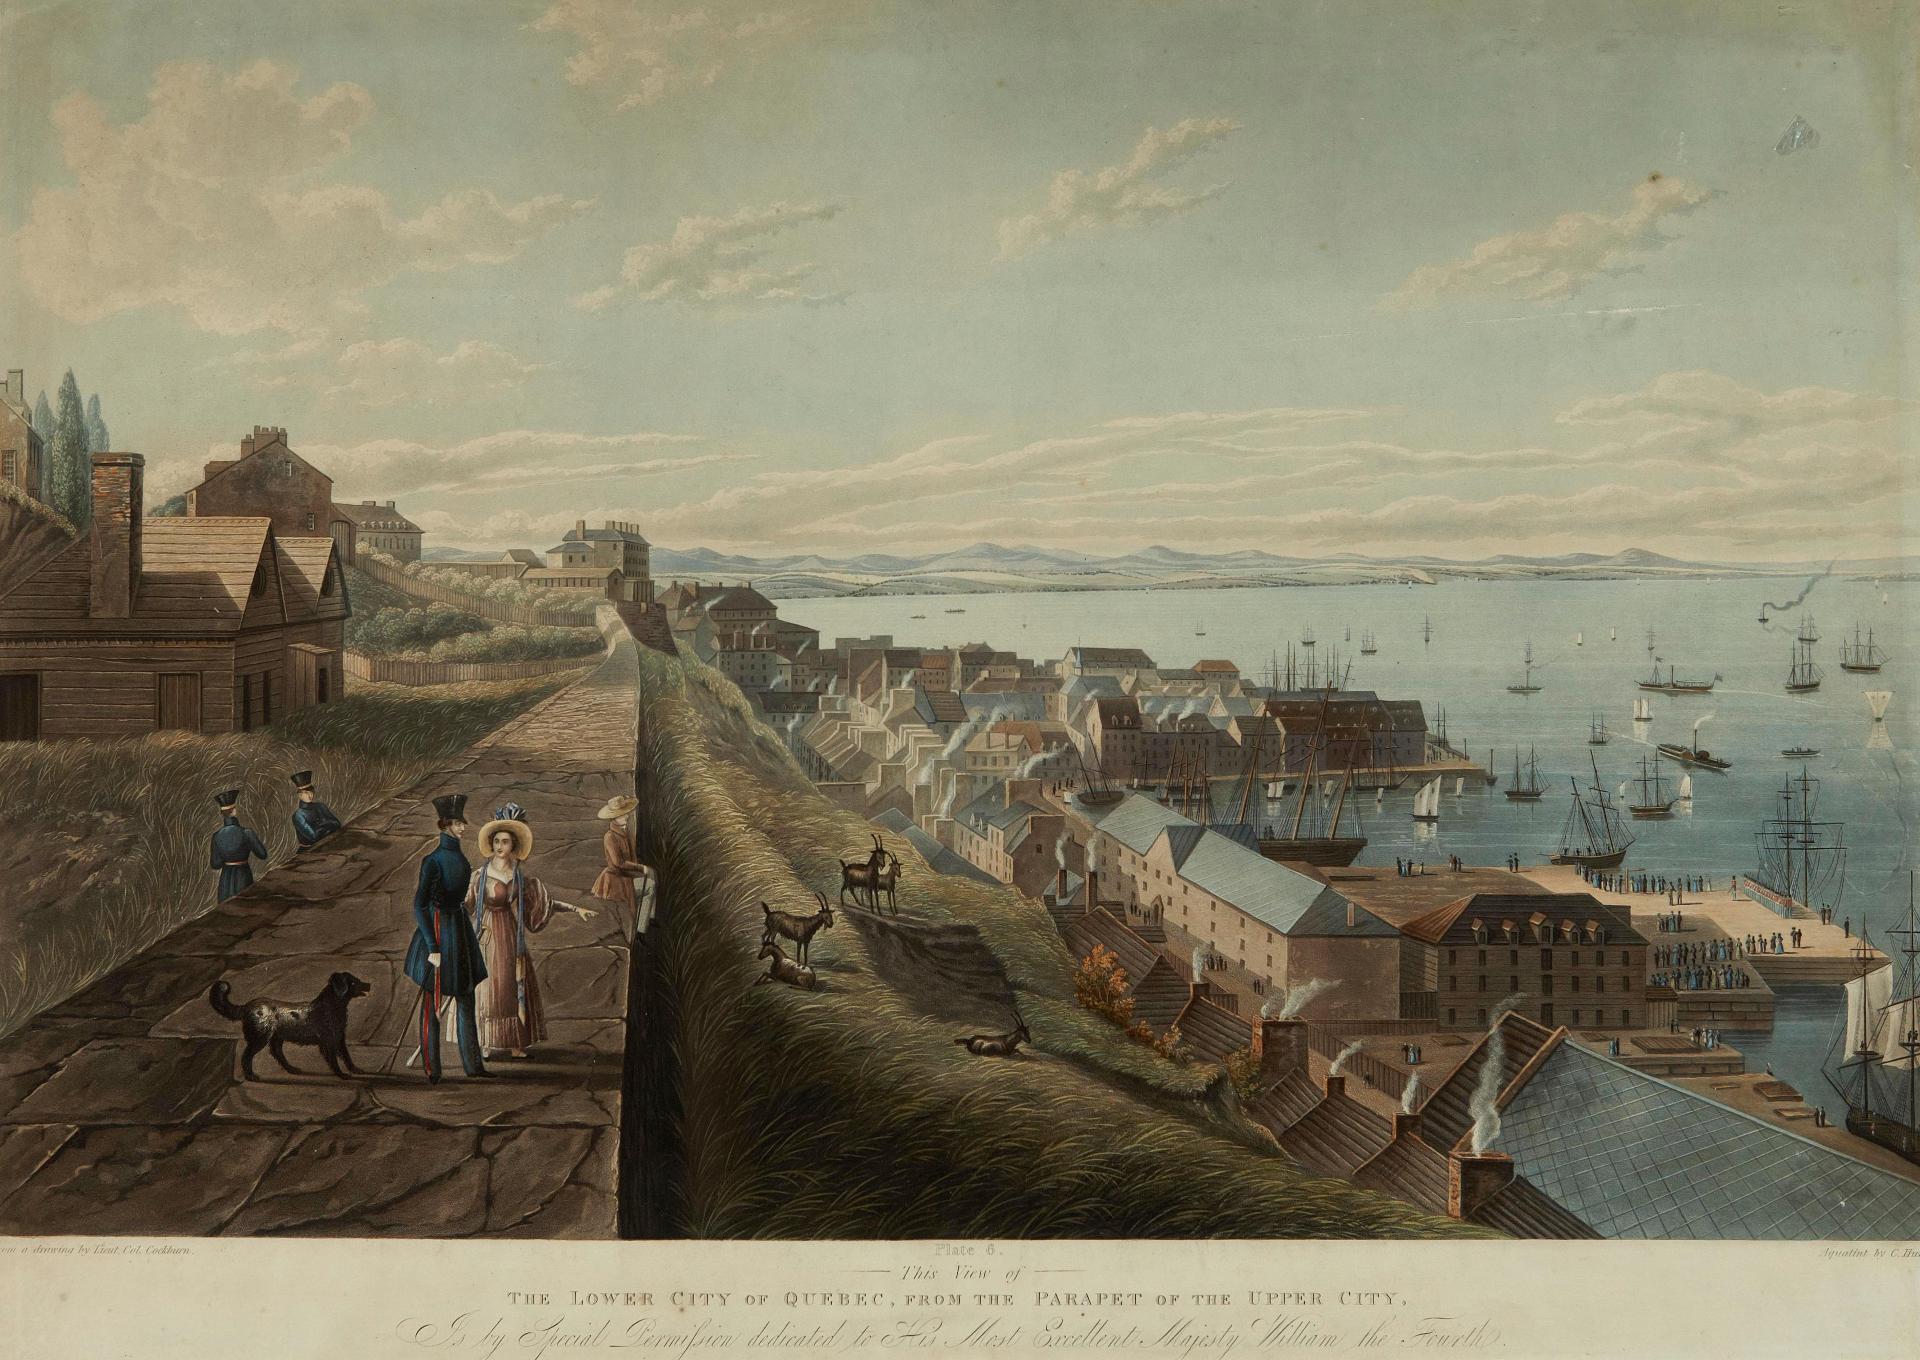 James Pattison Cockburn (1778-1847) - The Lower City of Quebec from the Parapet of the Upper City